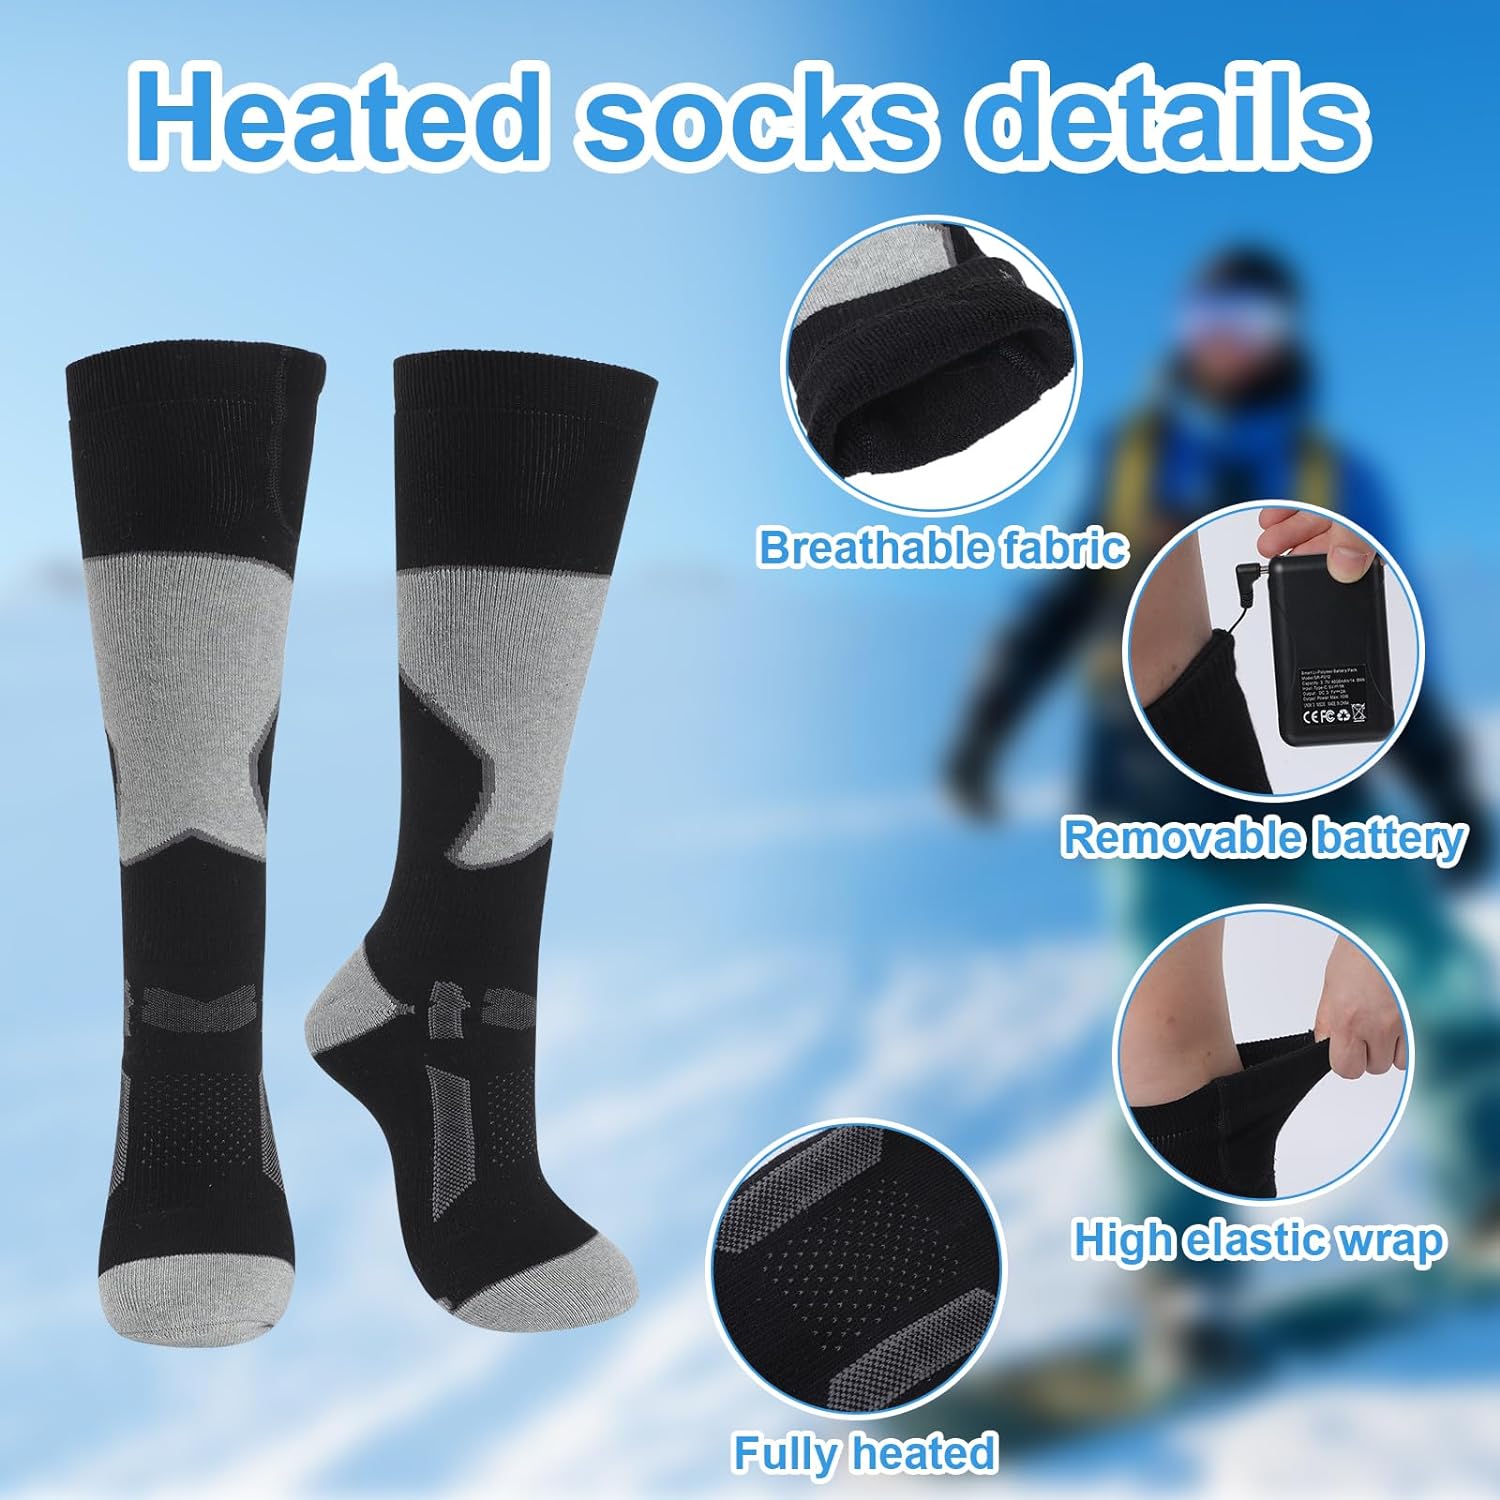 Didaey 2 Pairs Heated Socks for Men Women Electric Battery Rechargeable Heating Socks Heat Insulate Winter Socks Thick Warm Socks for Cycling Hiking amping Fishing Walking